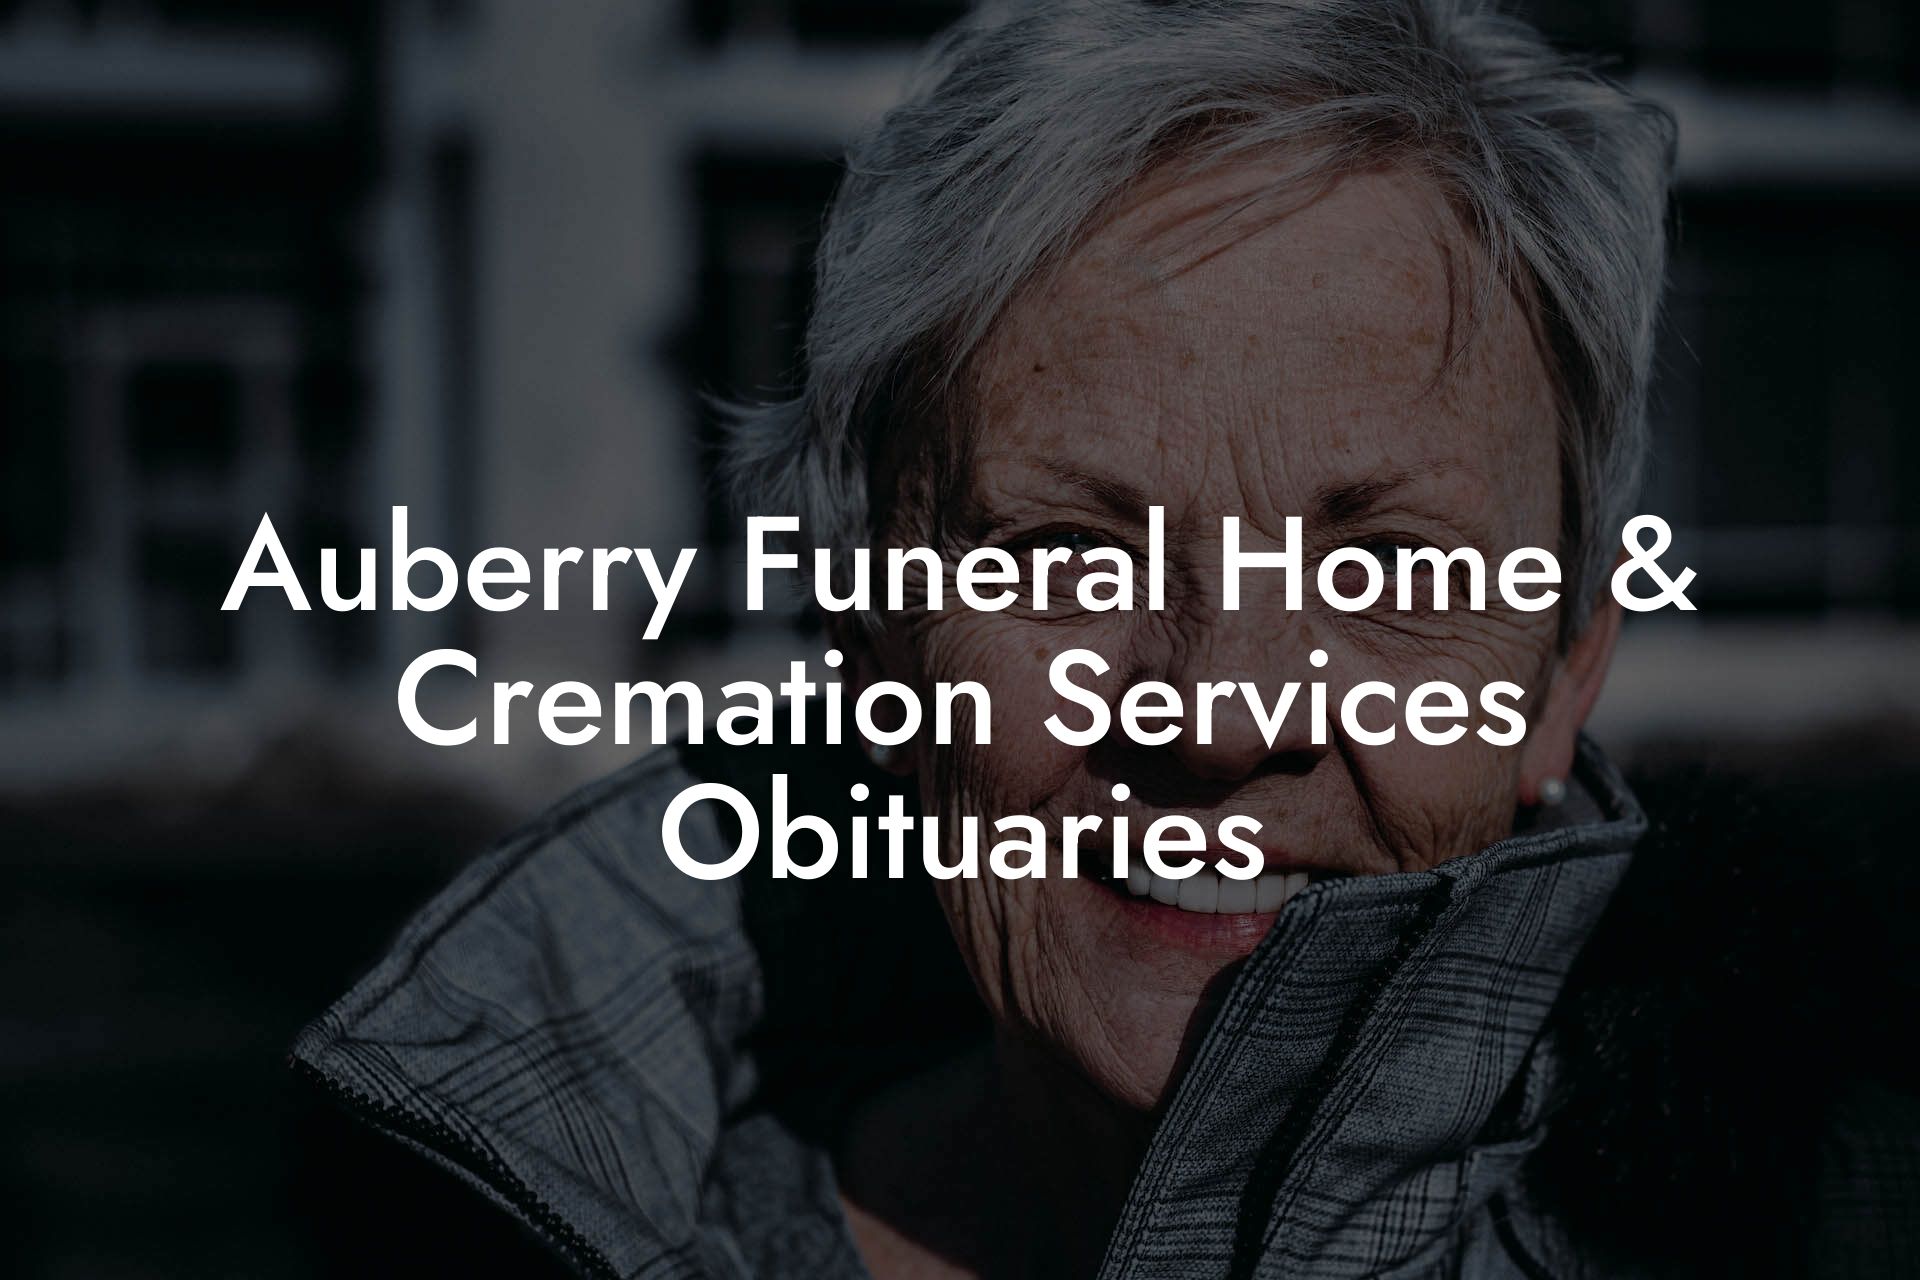 Auberry Funeral Home & Cremation Services Obituaries